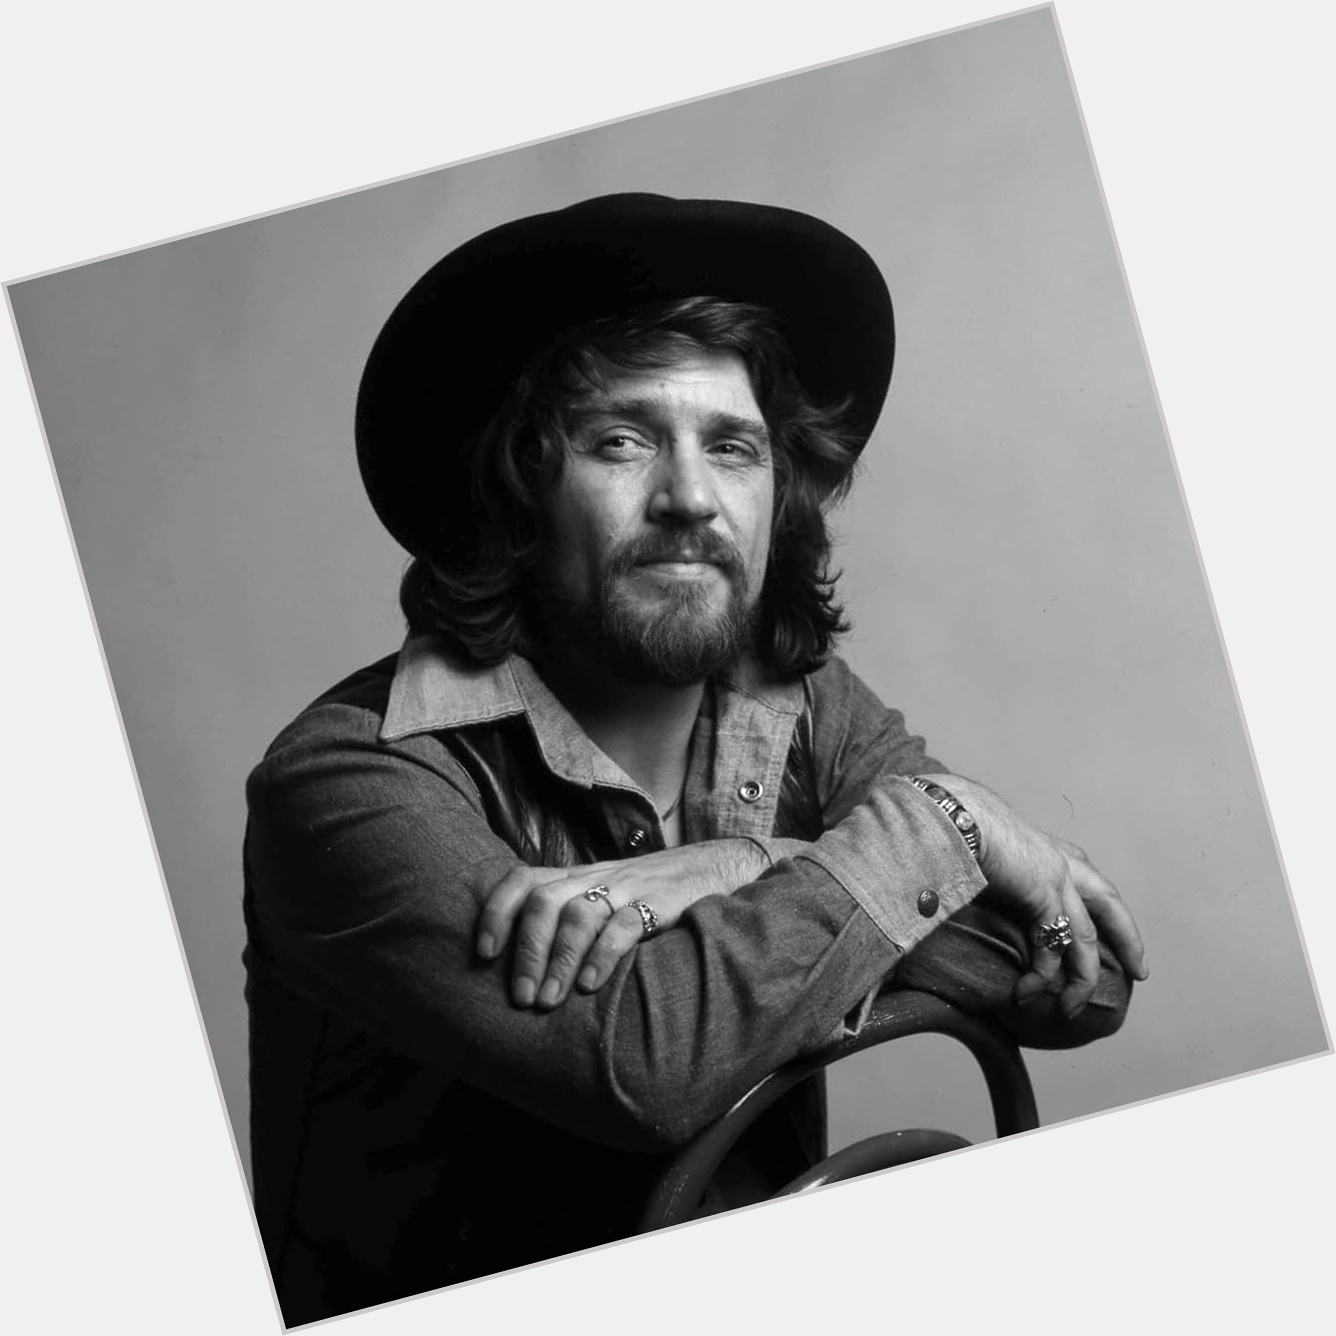 Today is the birthday of outlaw country legend Waylon Jennings. He would be 83 years old. Happy birthday, Waylon! 